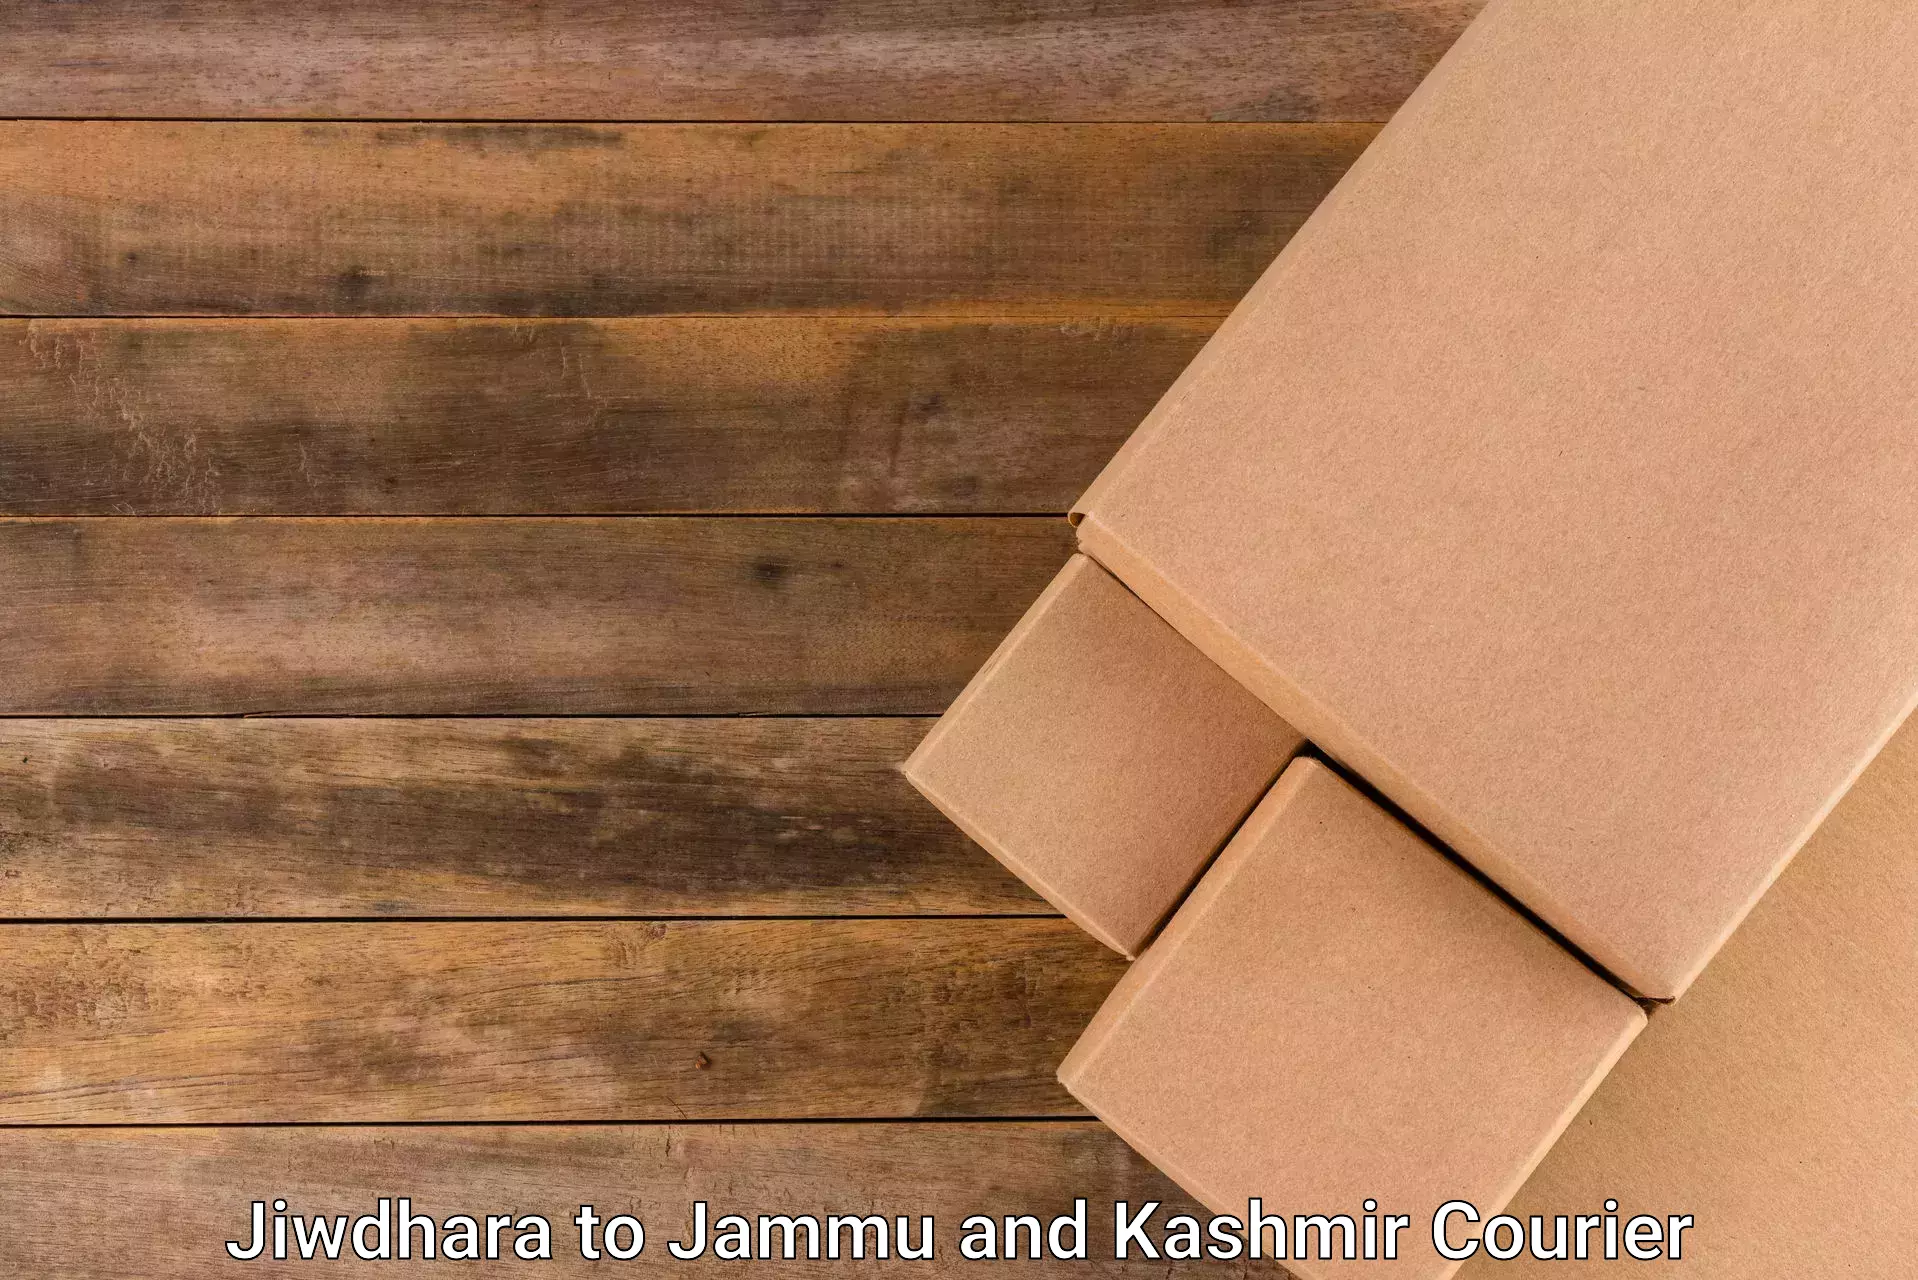 Overnight delivery services Jiwdhara to Katra